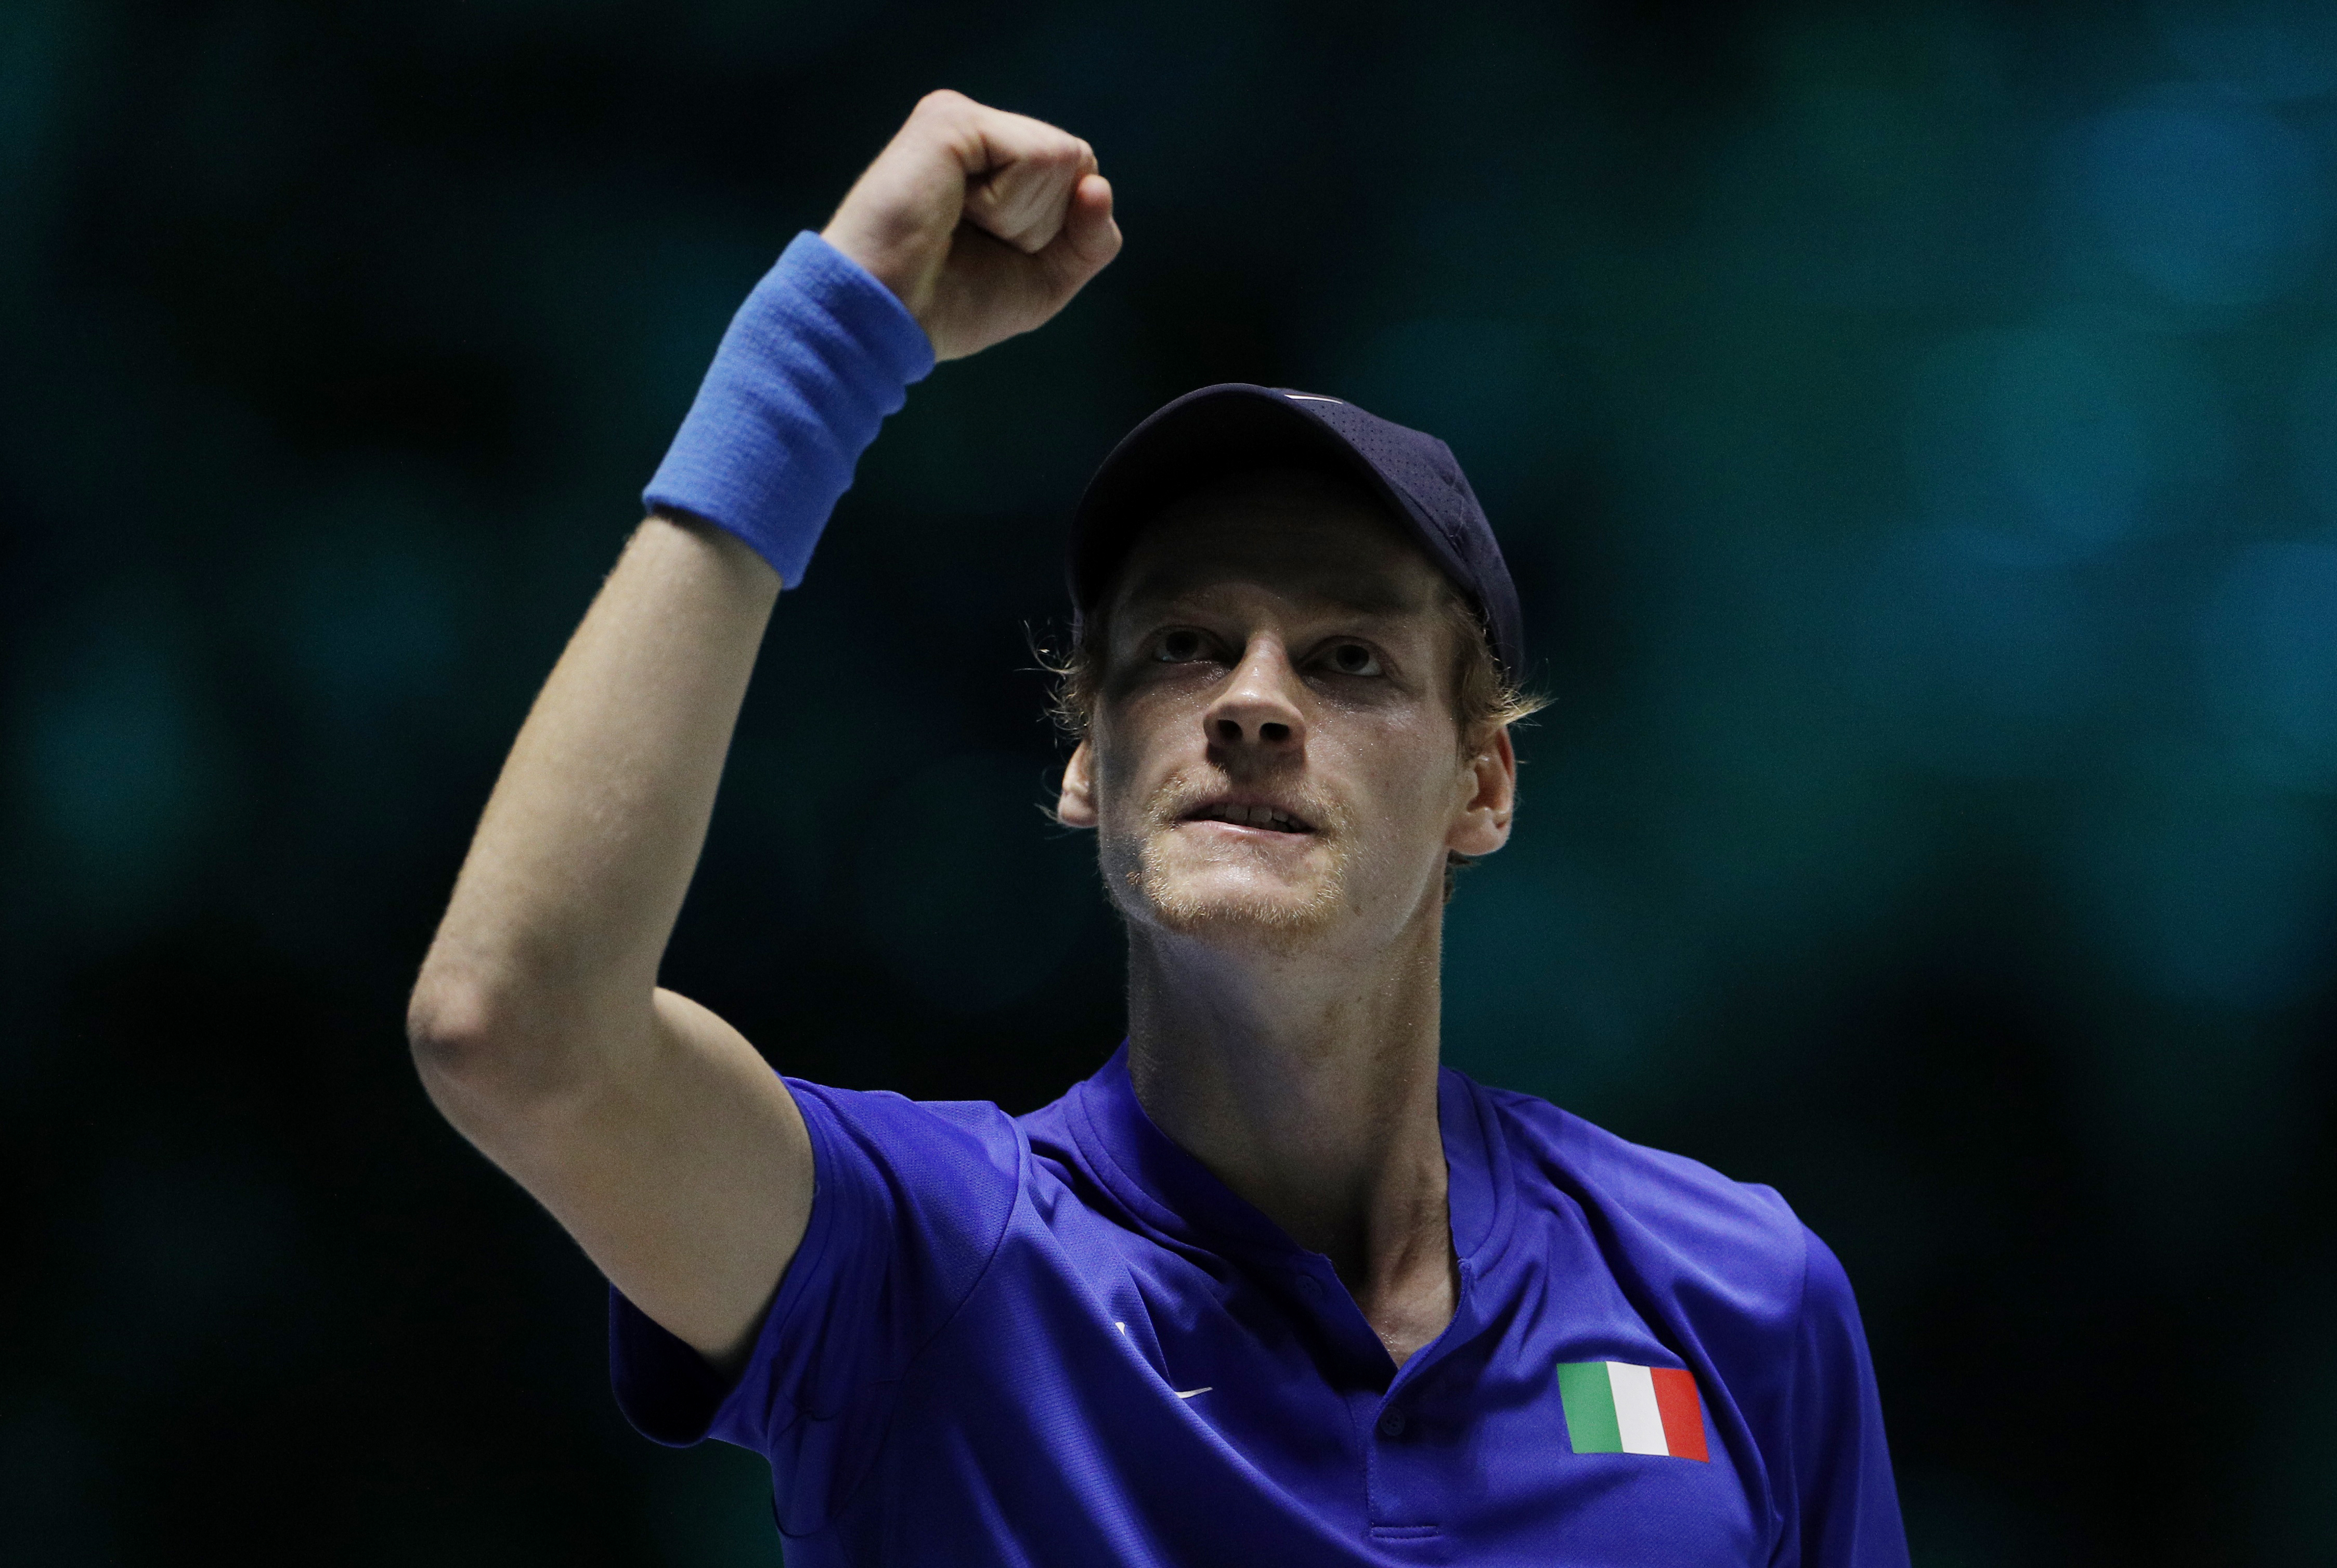 Tennis - Davis Cup Finals - Group F - Italy v Colombia - Pala Alpitour, Turin, Italy - November 27, 2021 Italy's Jannik Sinner celebrates winning the first set during his match against Colombia's Daniel Elahi Galan Riveros REUTERS/Guglielmo Mangiapane